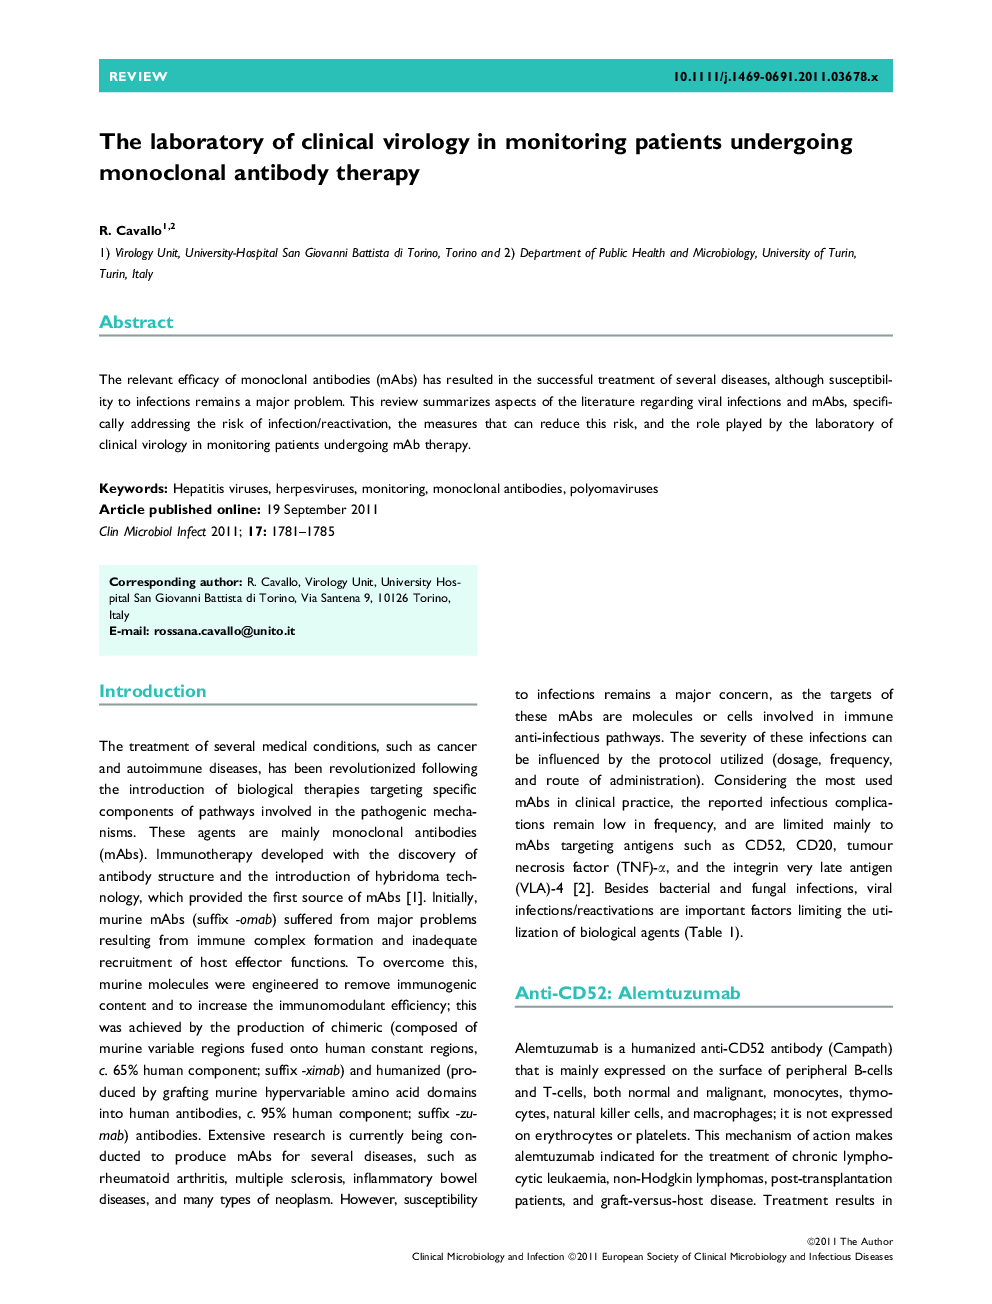 The laboratory of clinical virology in monitoring patients undergoing monoclonal antibody therapy 